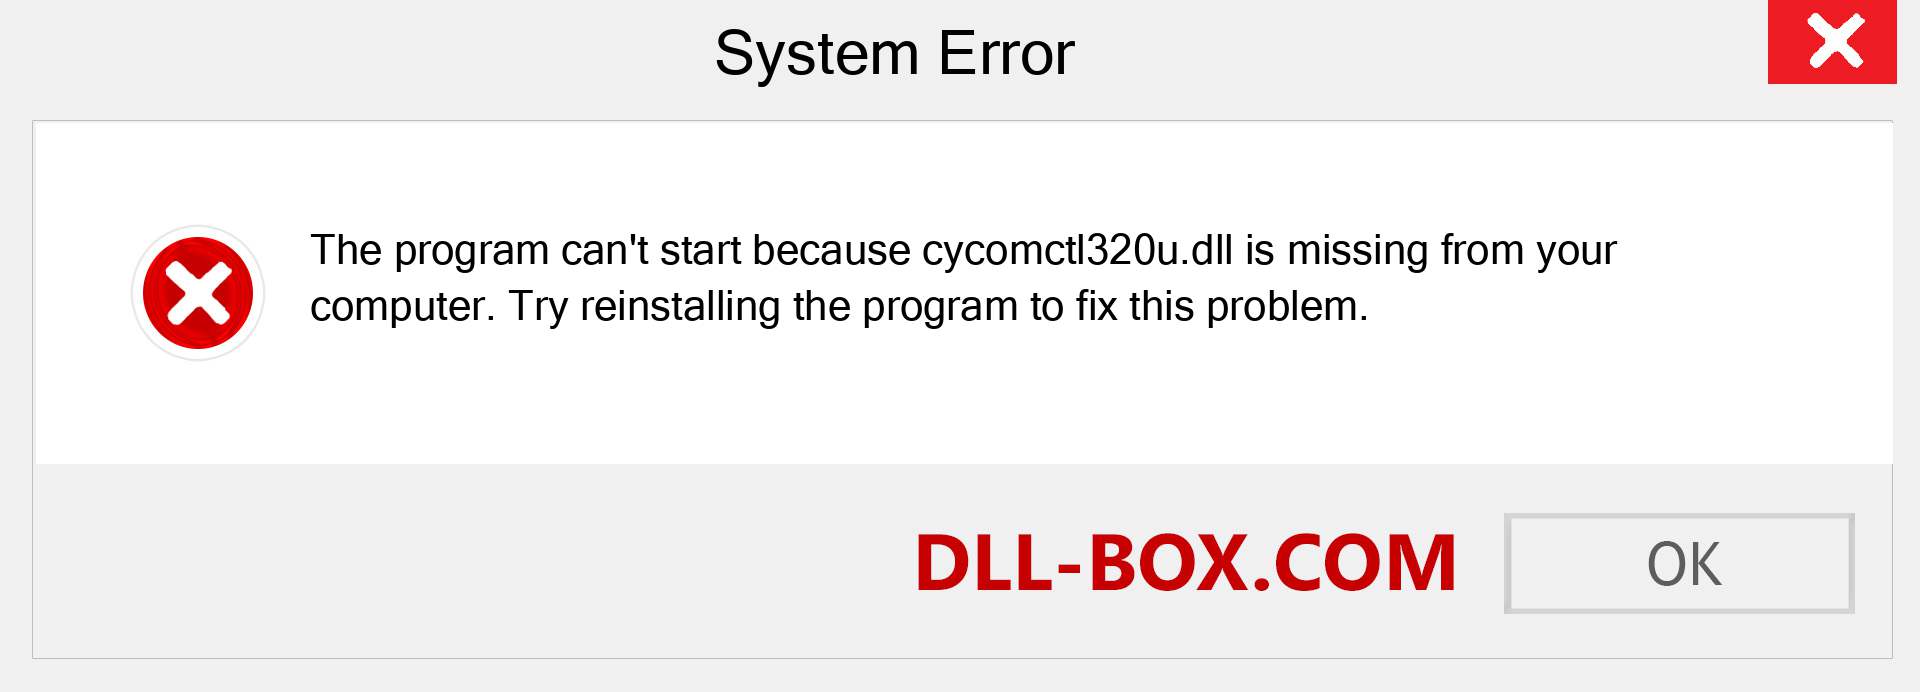  cycomctl320u.dll file is missing?. Download for Windows 7, 8, 10 - Fix  cycomctl320u dll Missing Error on Windows, photos, images